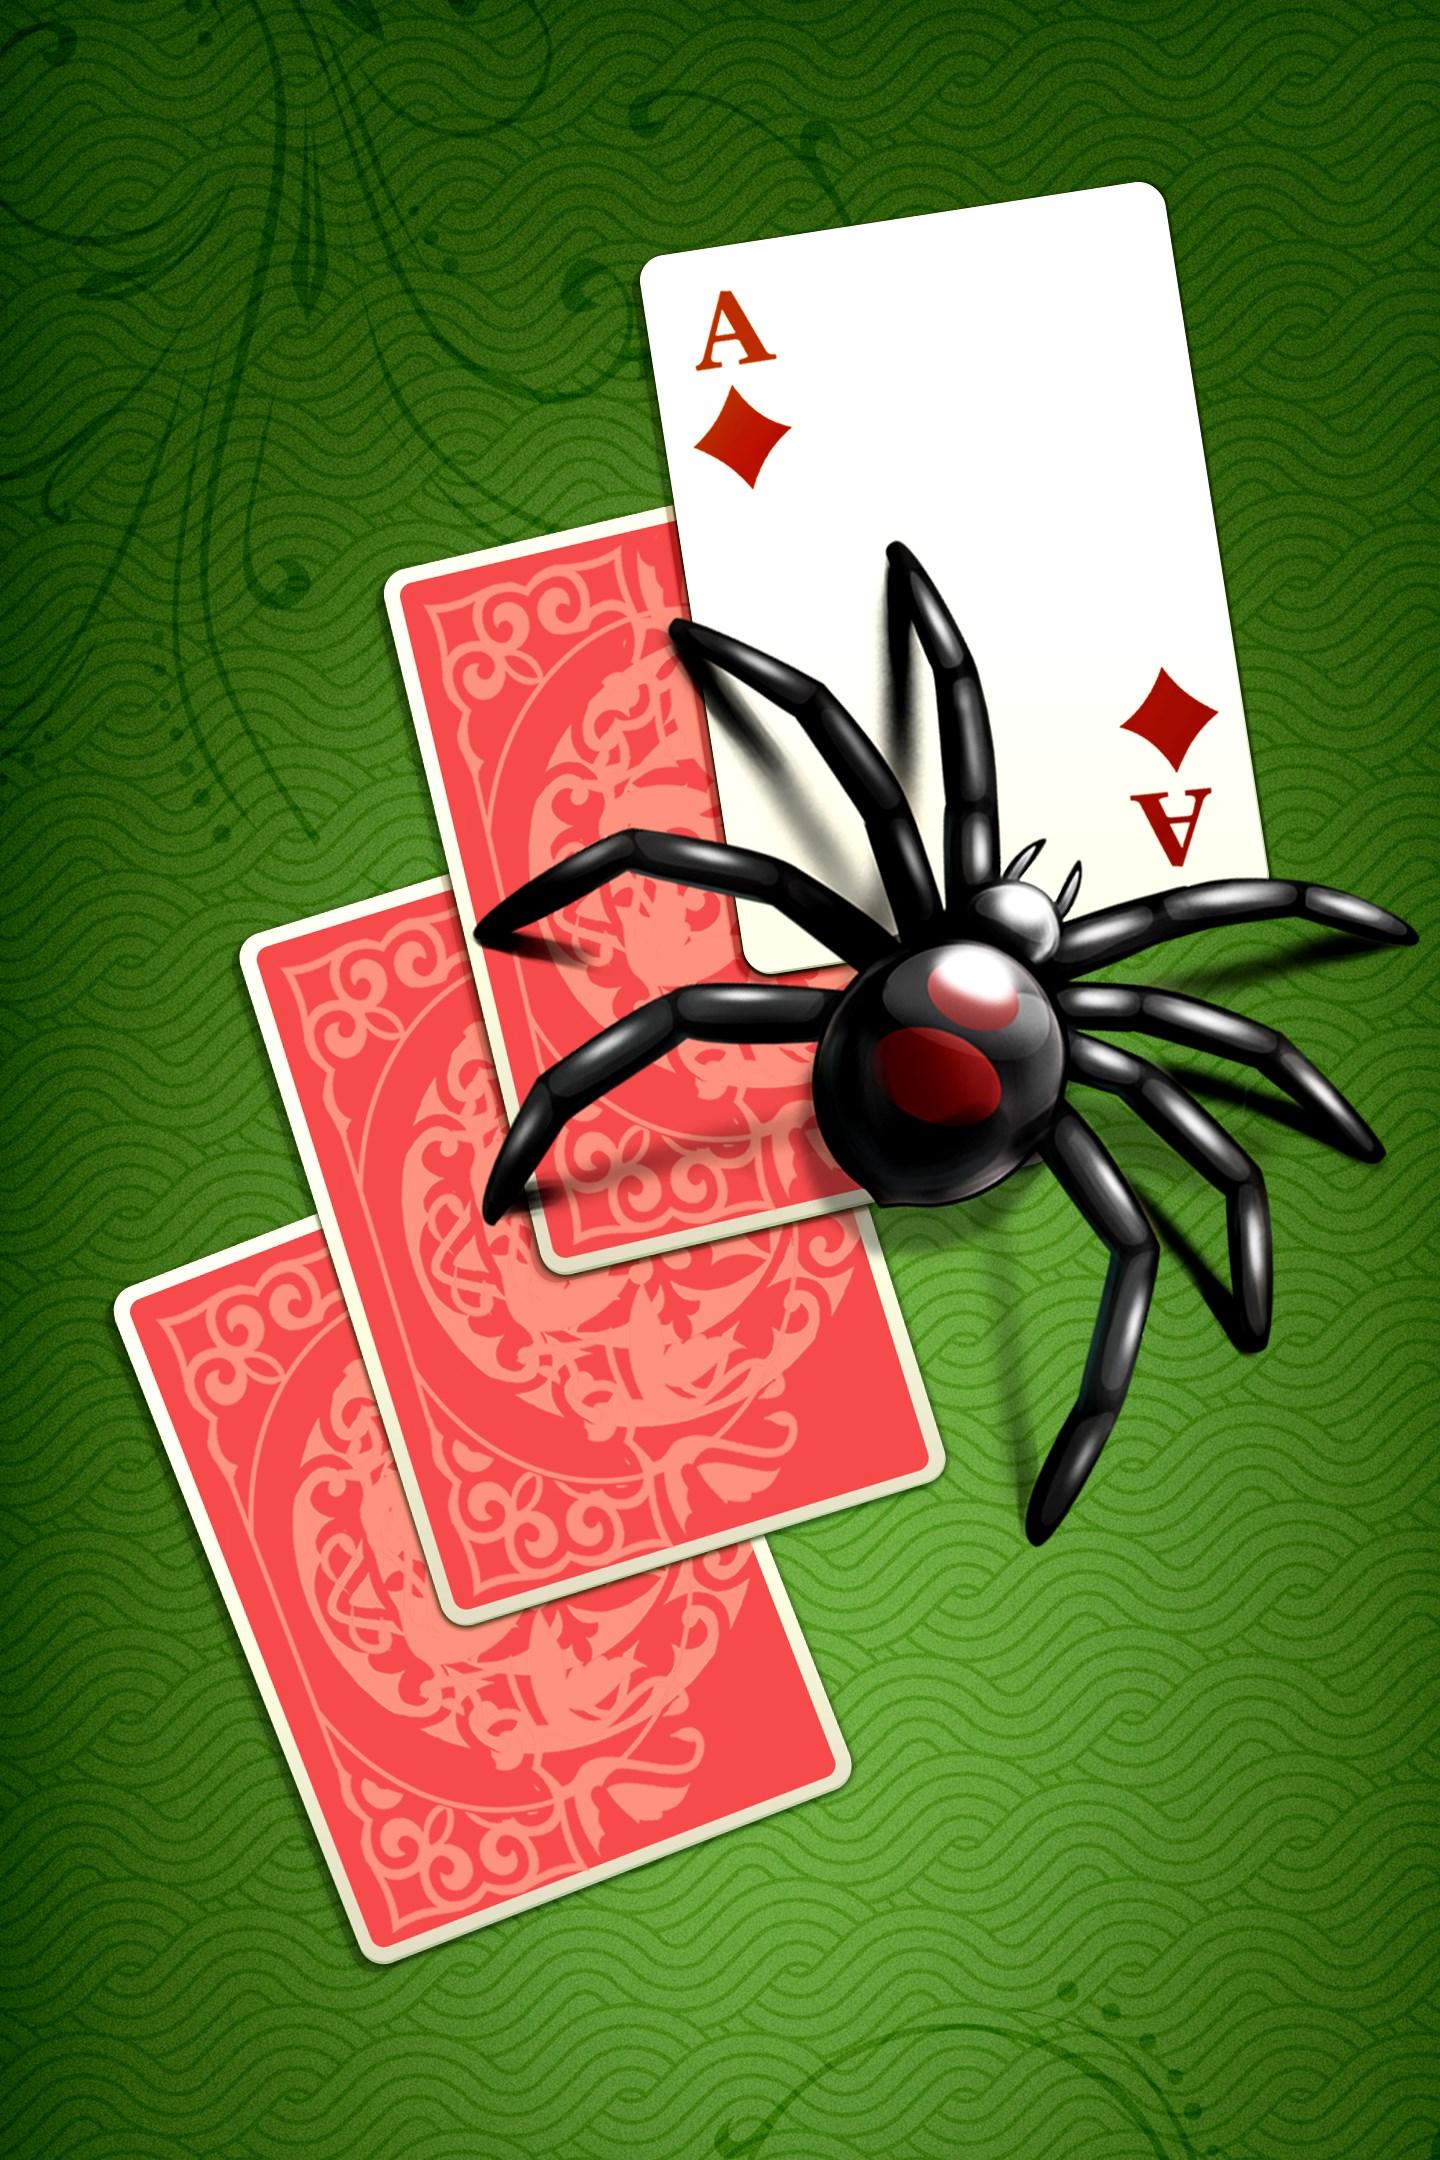 card game spider solitaire free